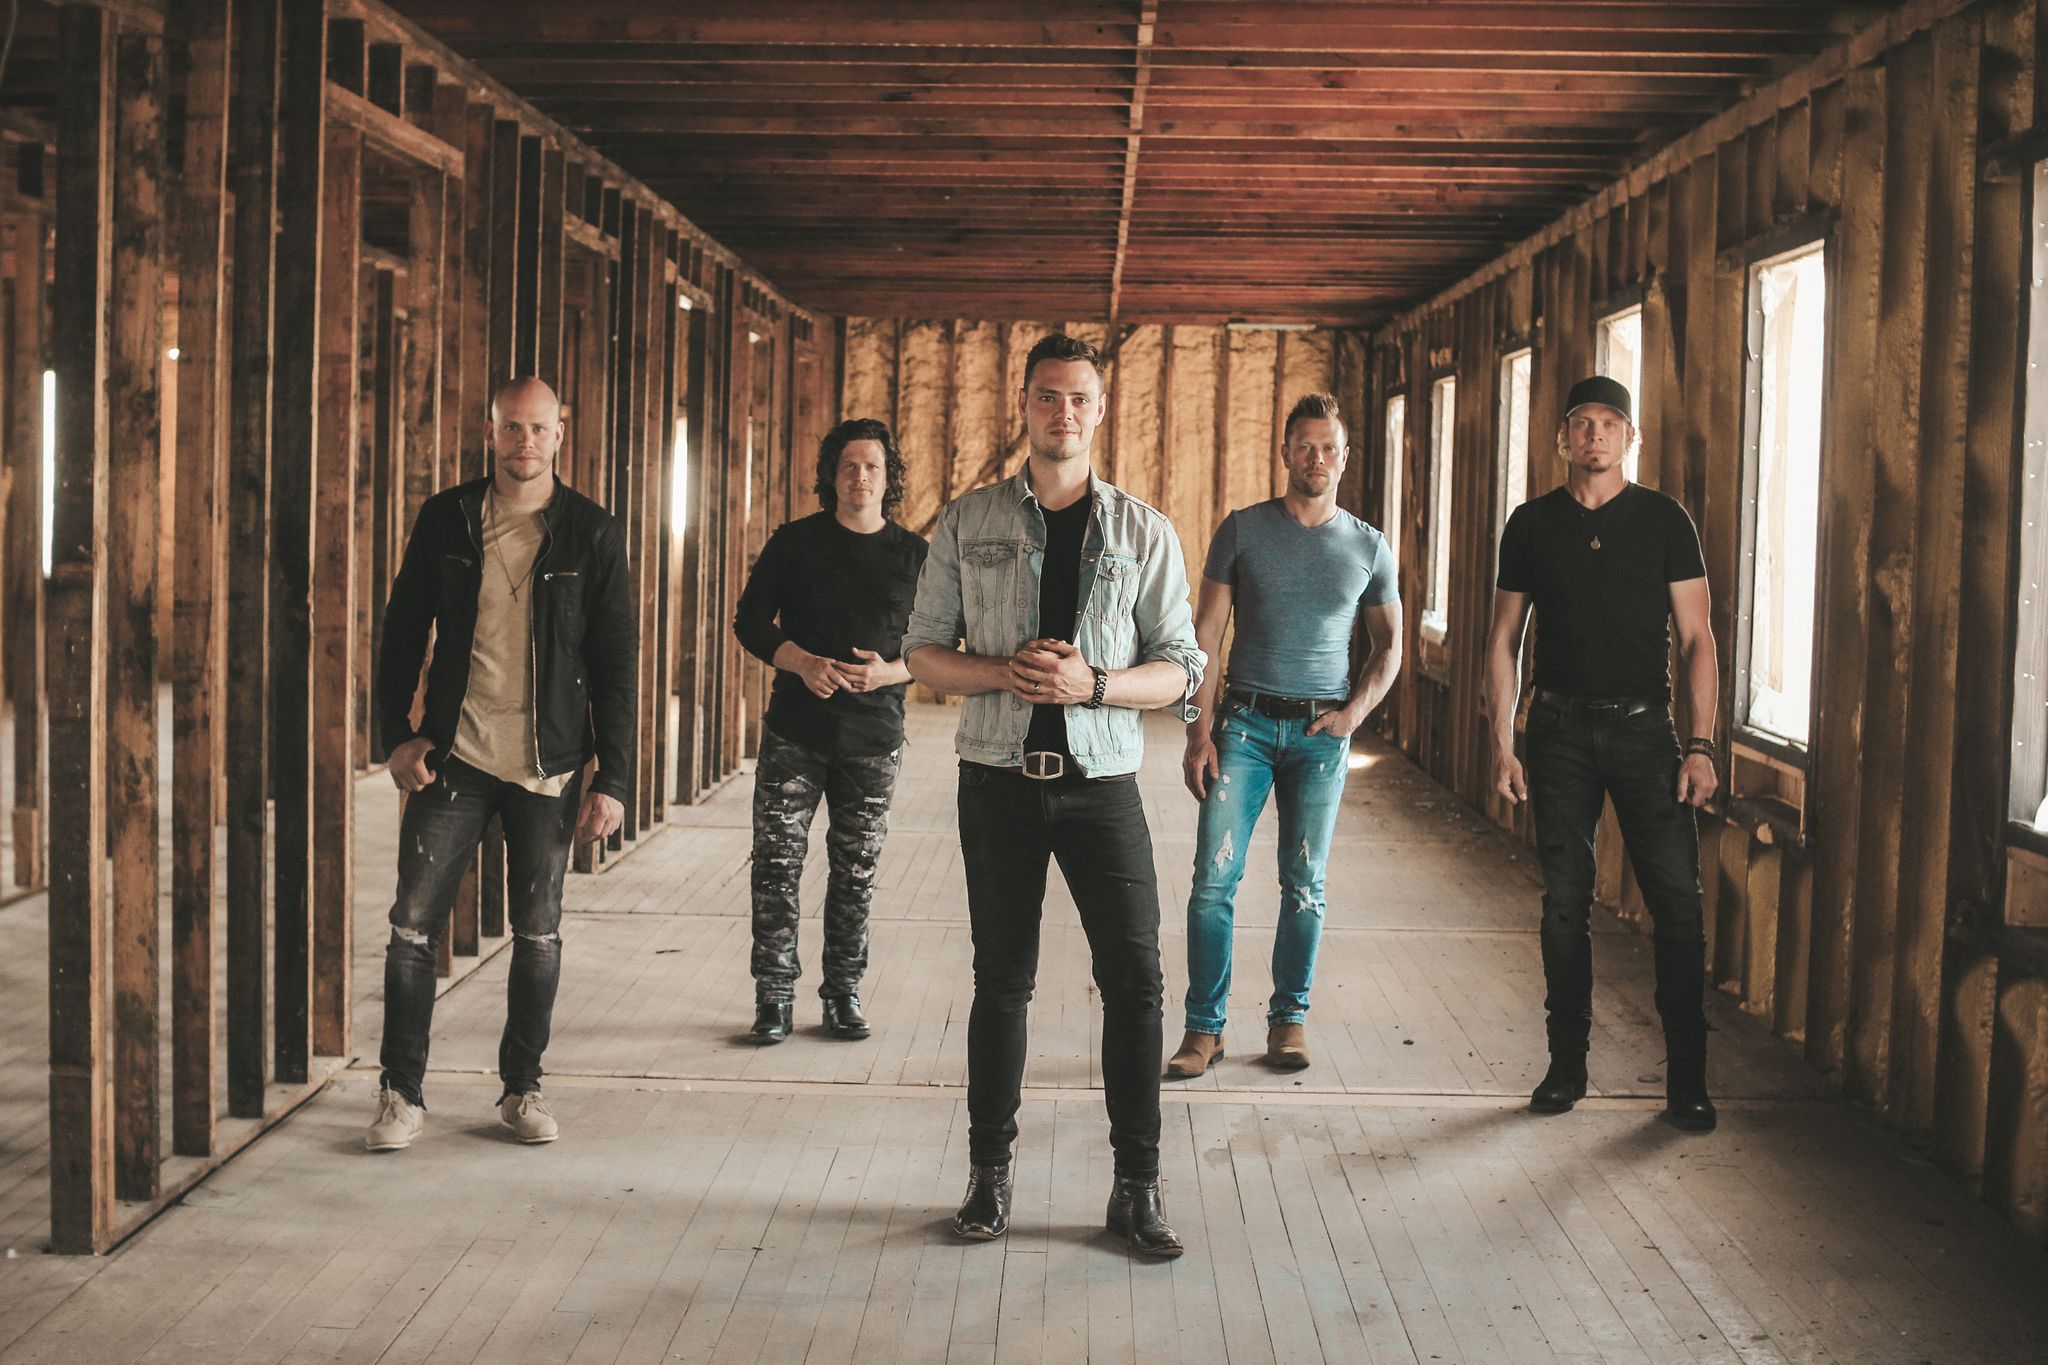 HUNTER BROTHERS RELEASE TIMELY, ANTHEMIC SUMMERTIME SINGLE “PEACE, LOVE & COUNTRY MUSIC”